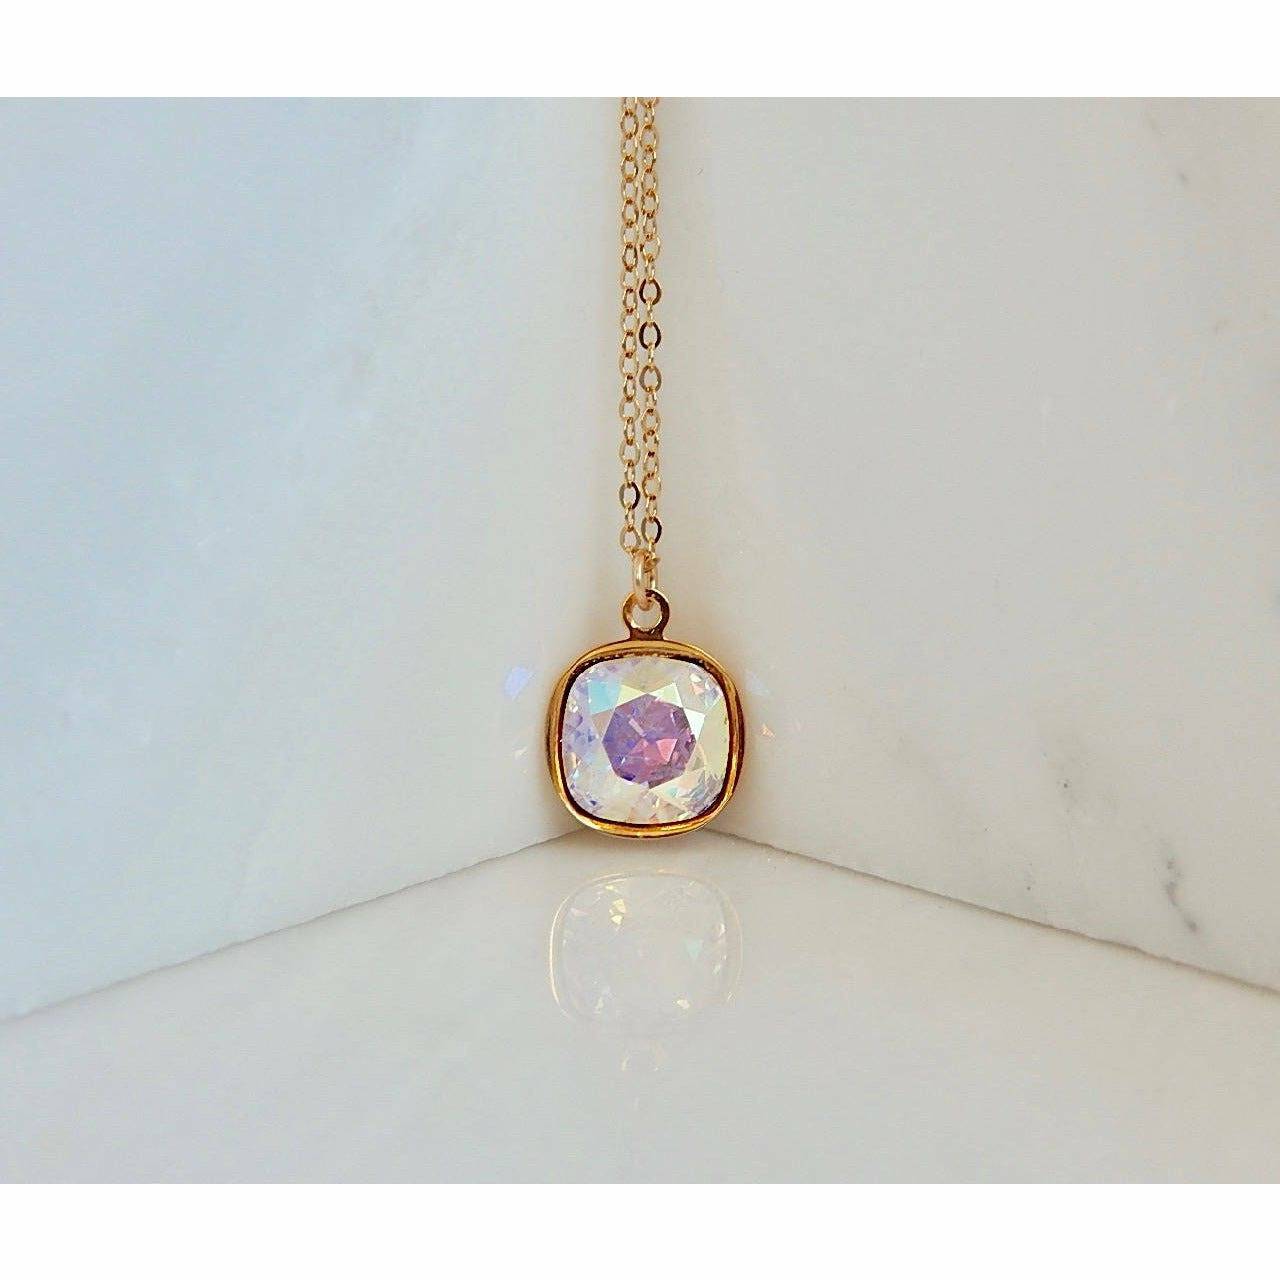 Rainbow square crystal necklace